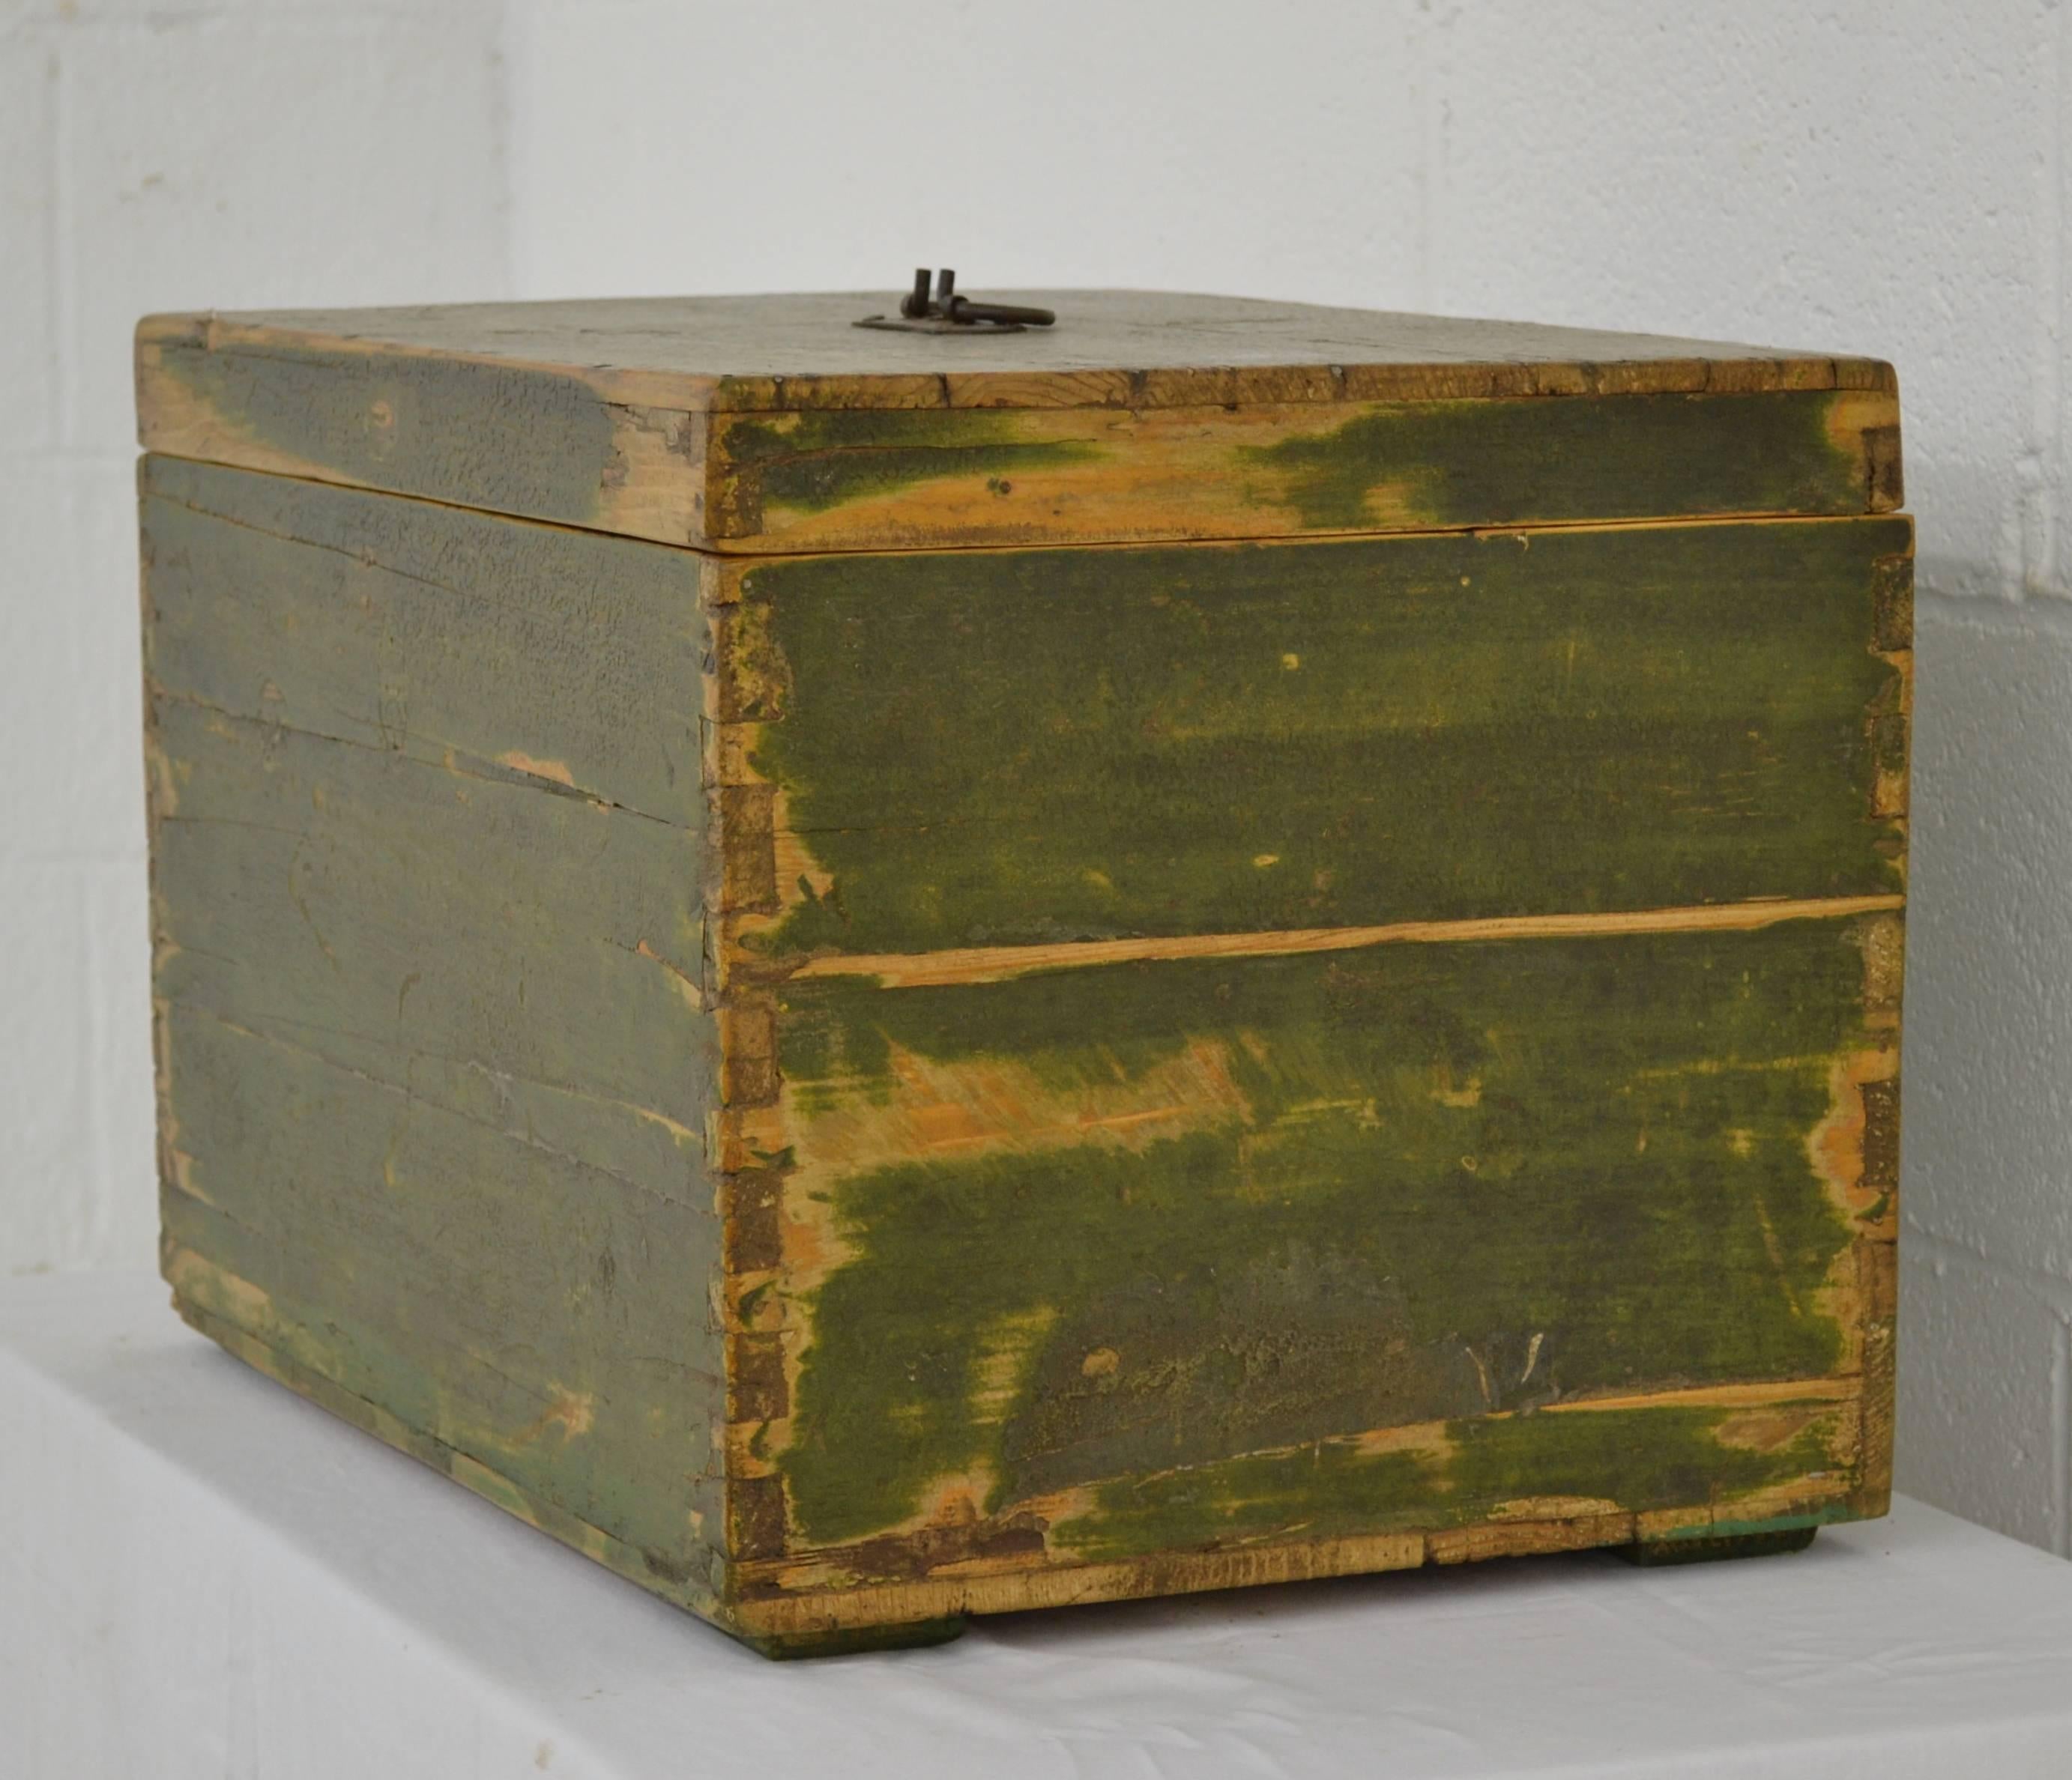 A vintage pine dovetailed army box with a wrought iron handle. In well-worn old green paint.